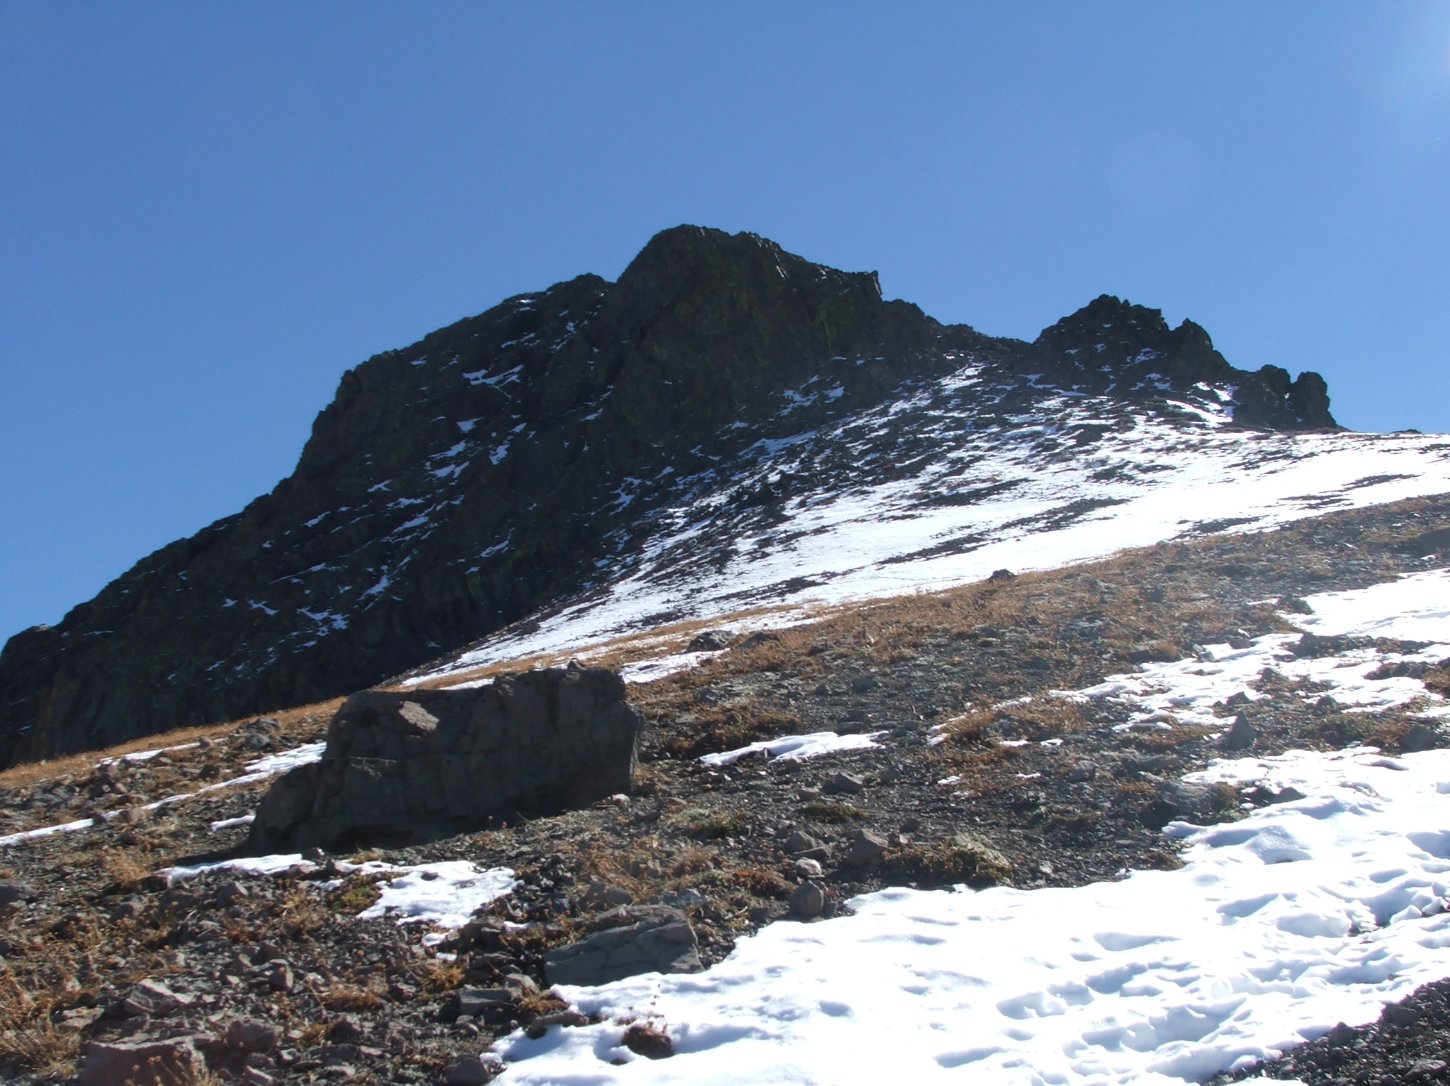 View of the summit